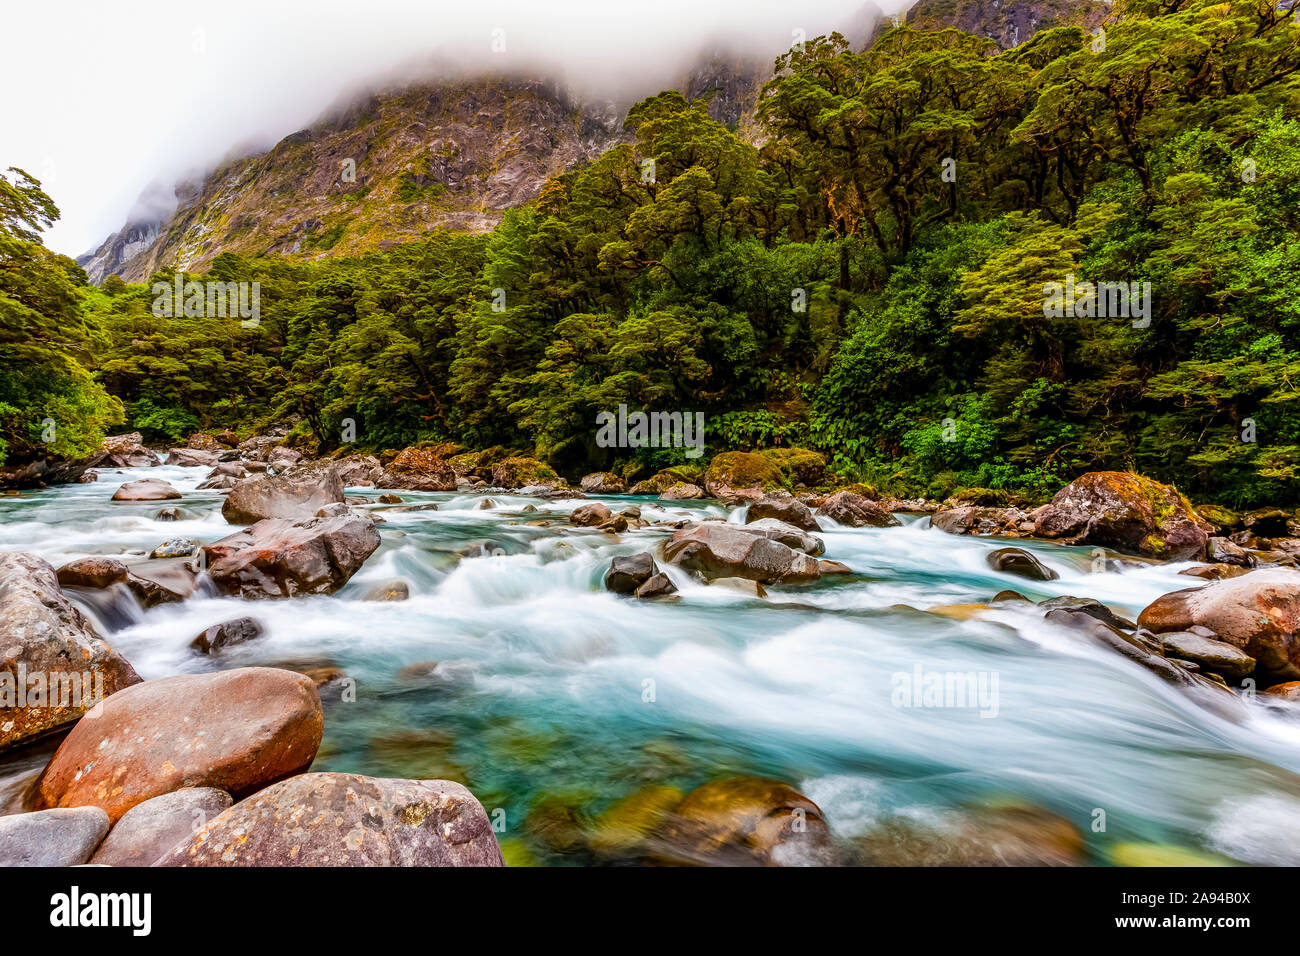 A river under low cloud; South Island, New Zealand Stock Photo